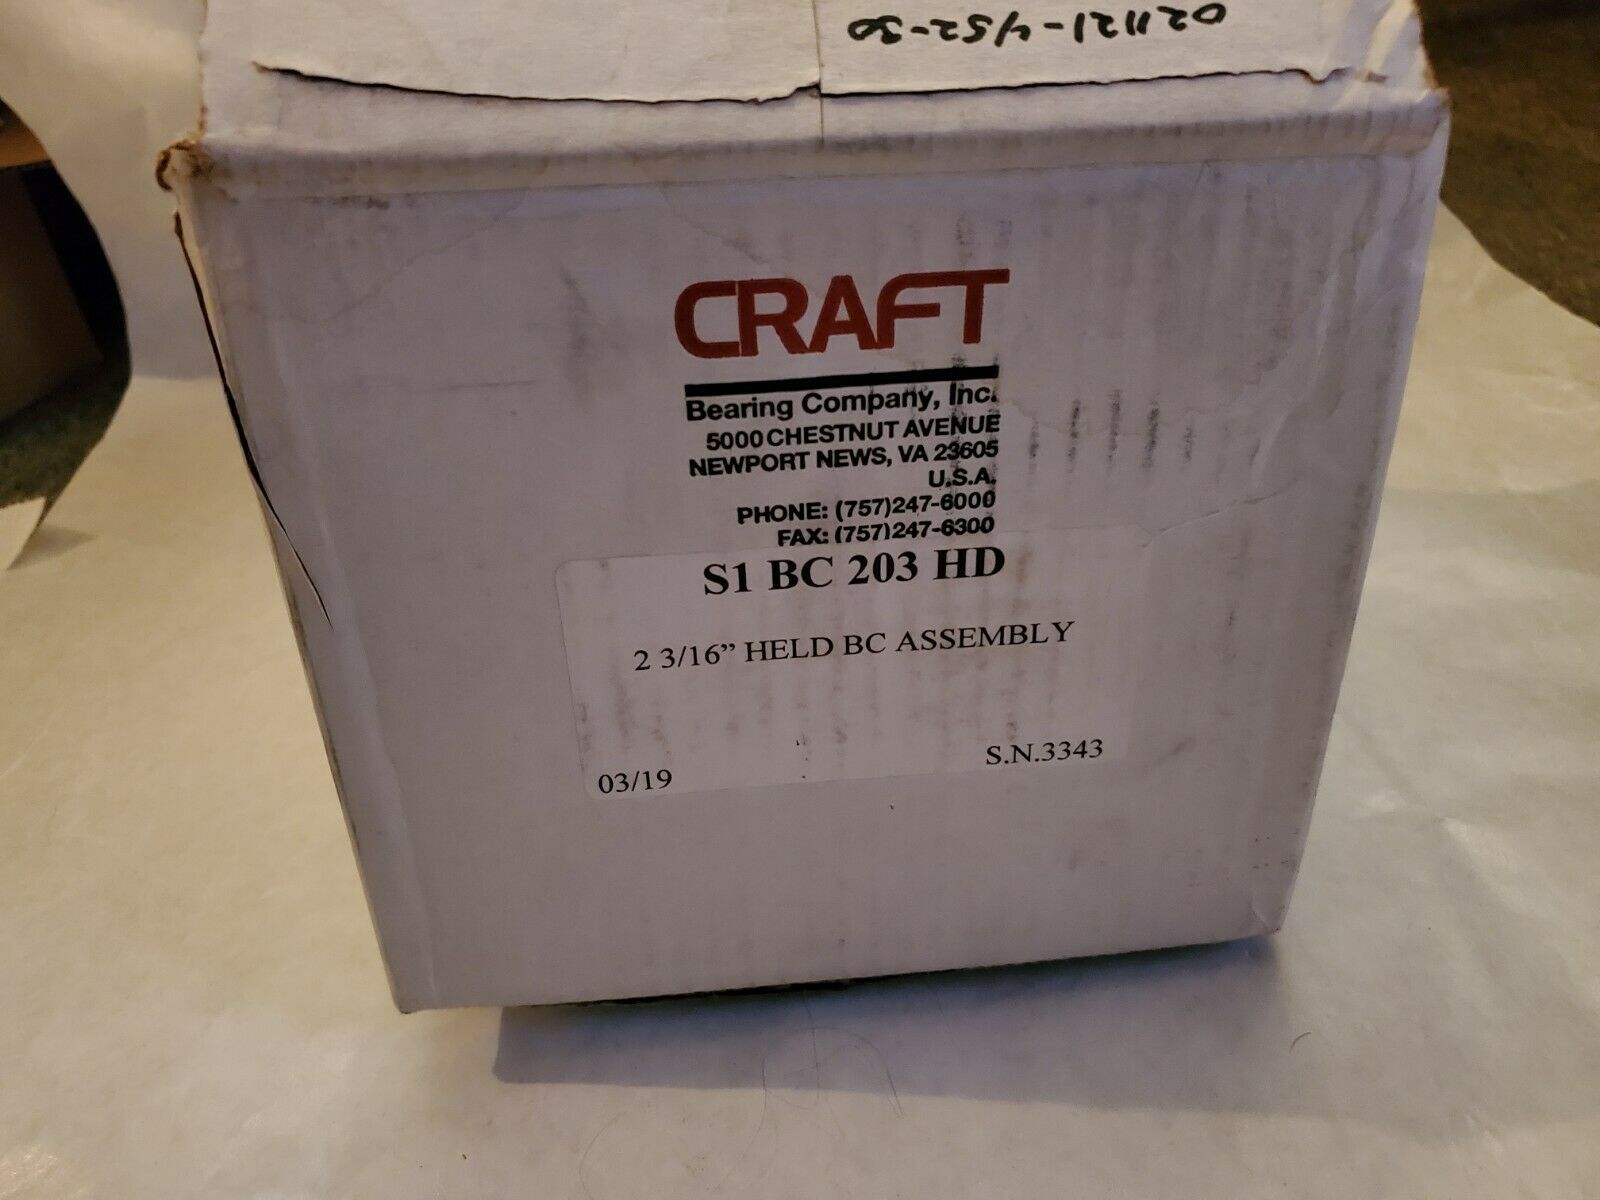 Primary image for Craft S1 BC 203 HD 2-3/16" HELD BEARING CARTRIDGE ASSEMBLY 